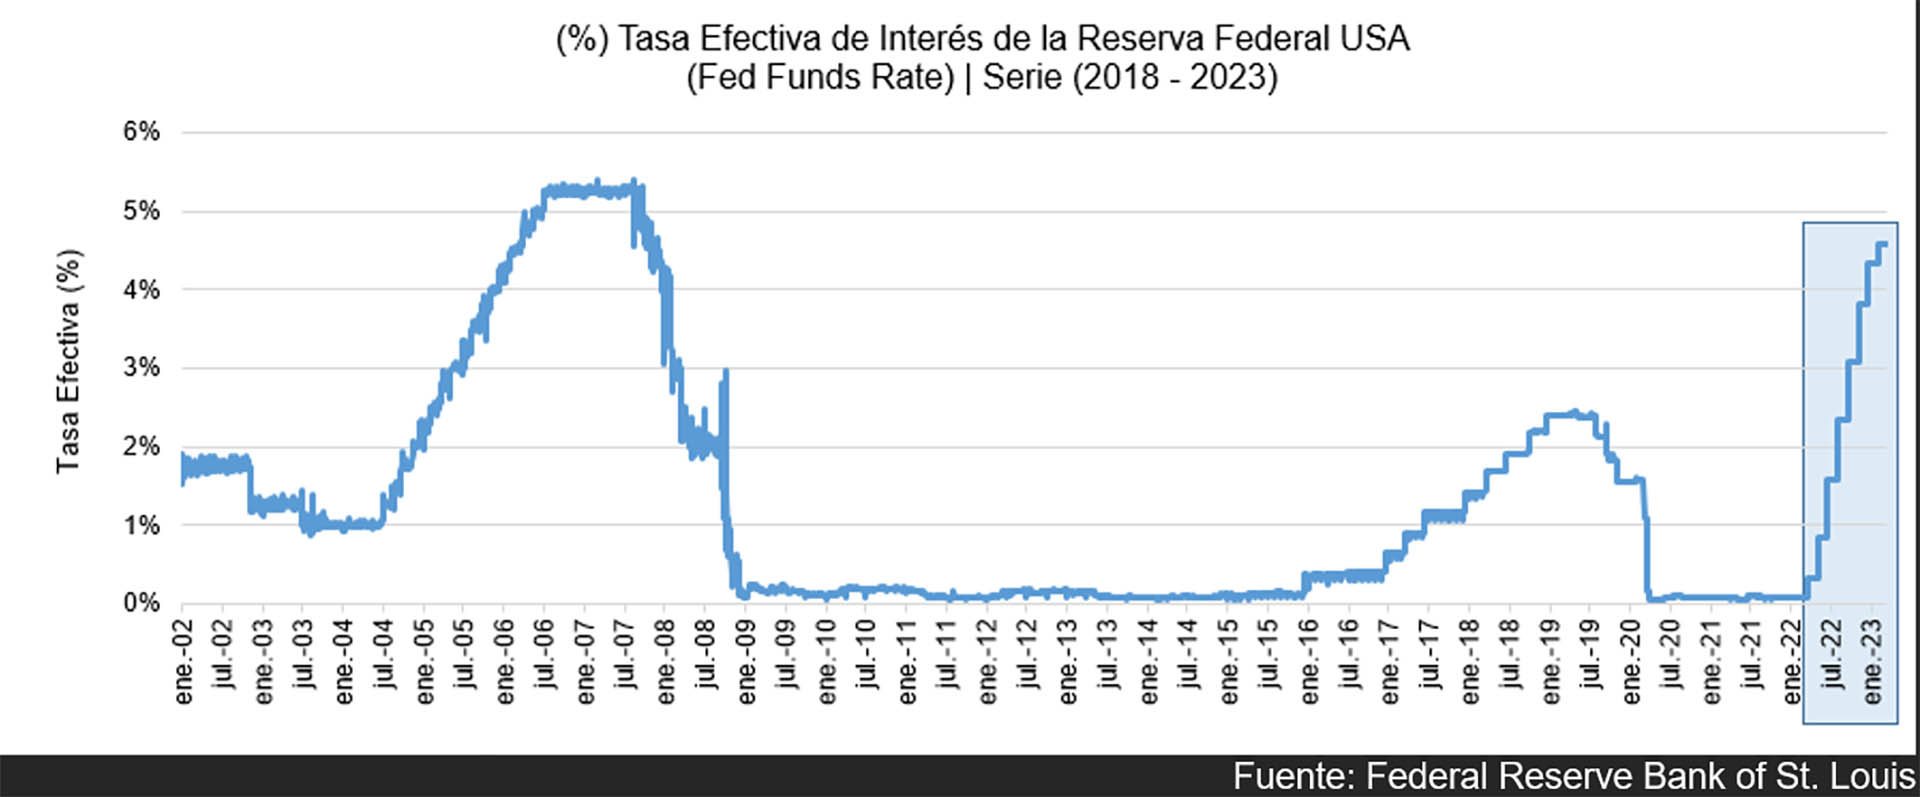 Fuente: Federal Reserve Bank of St. Louis